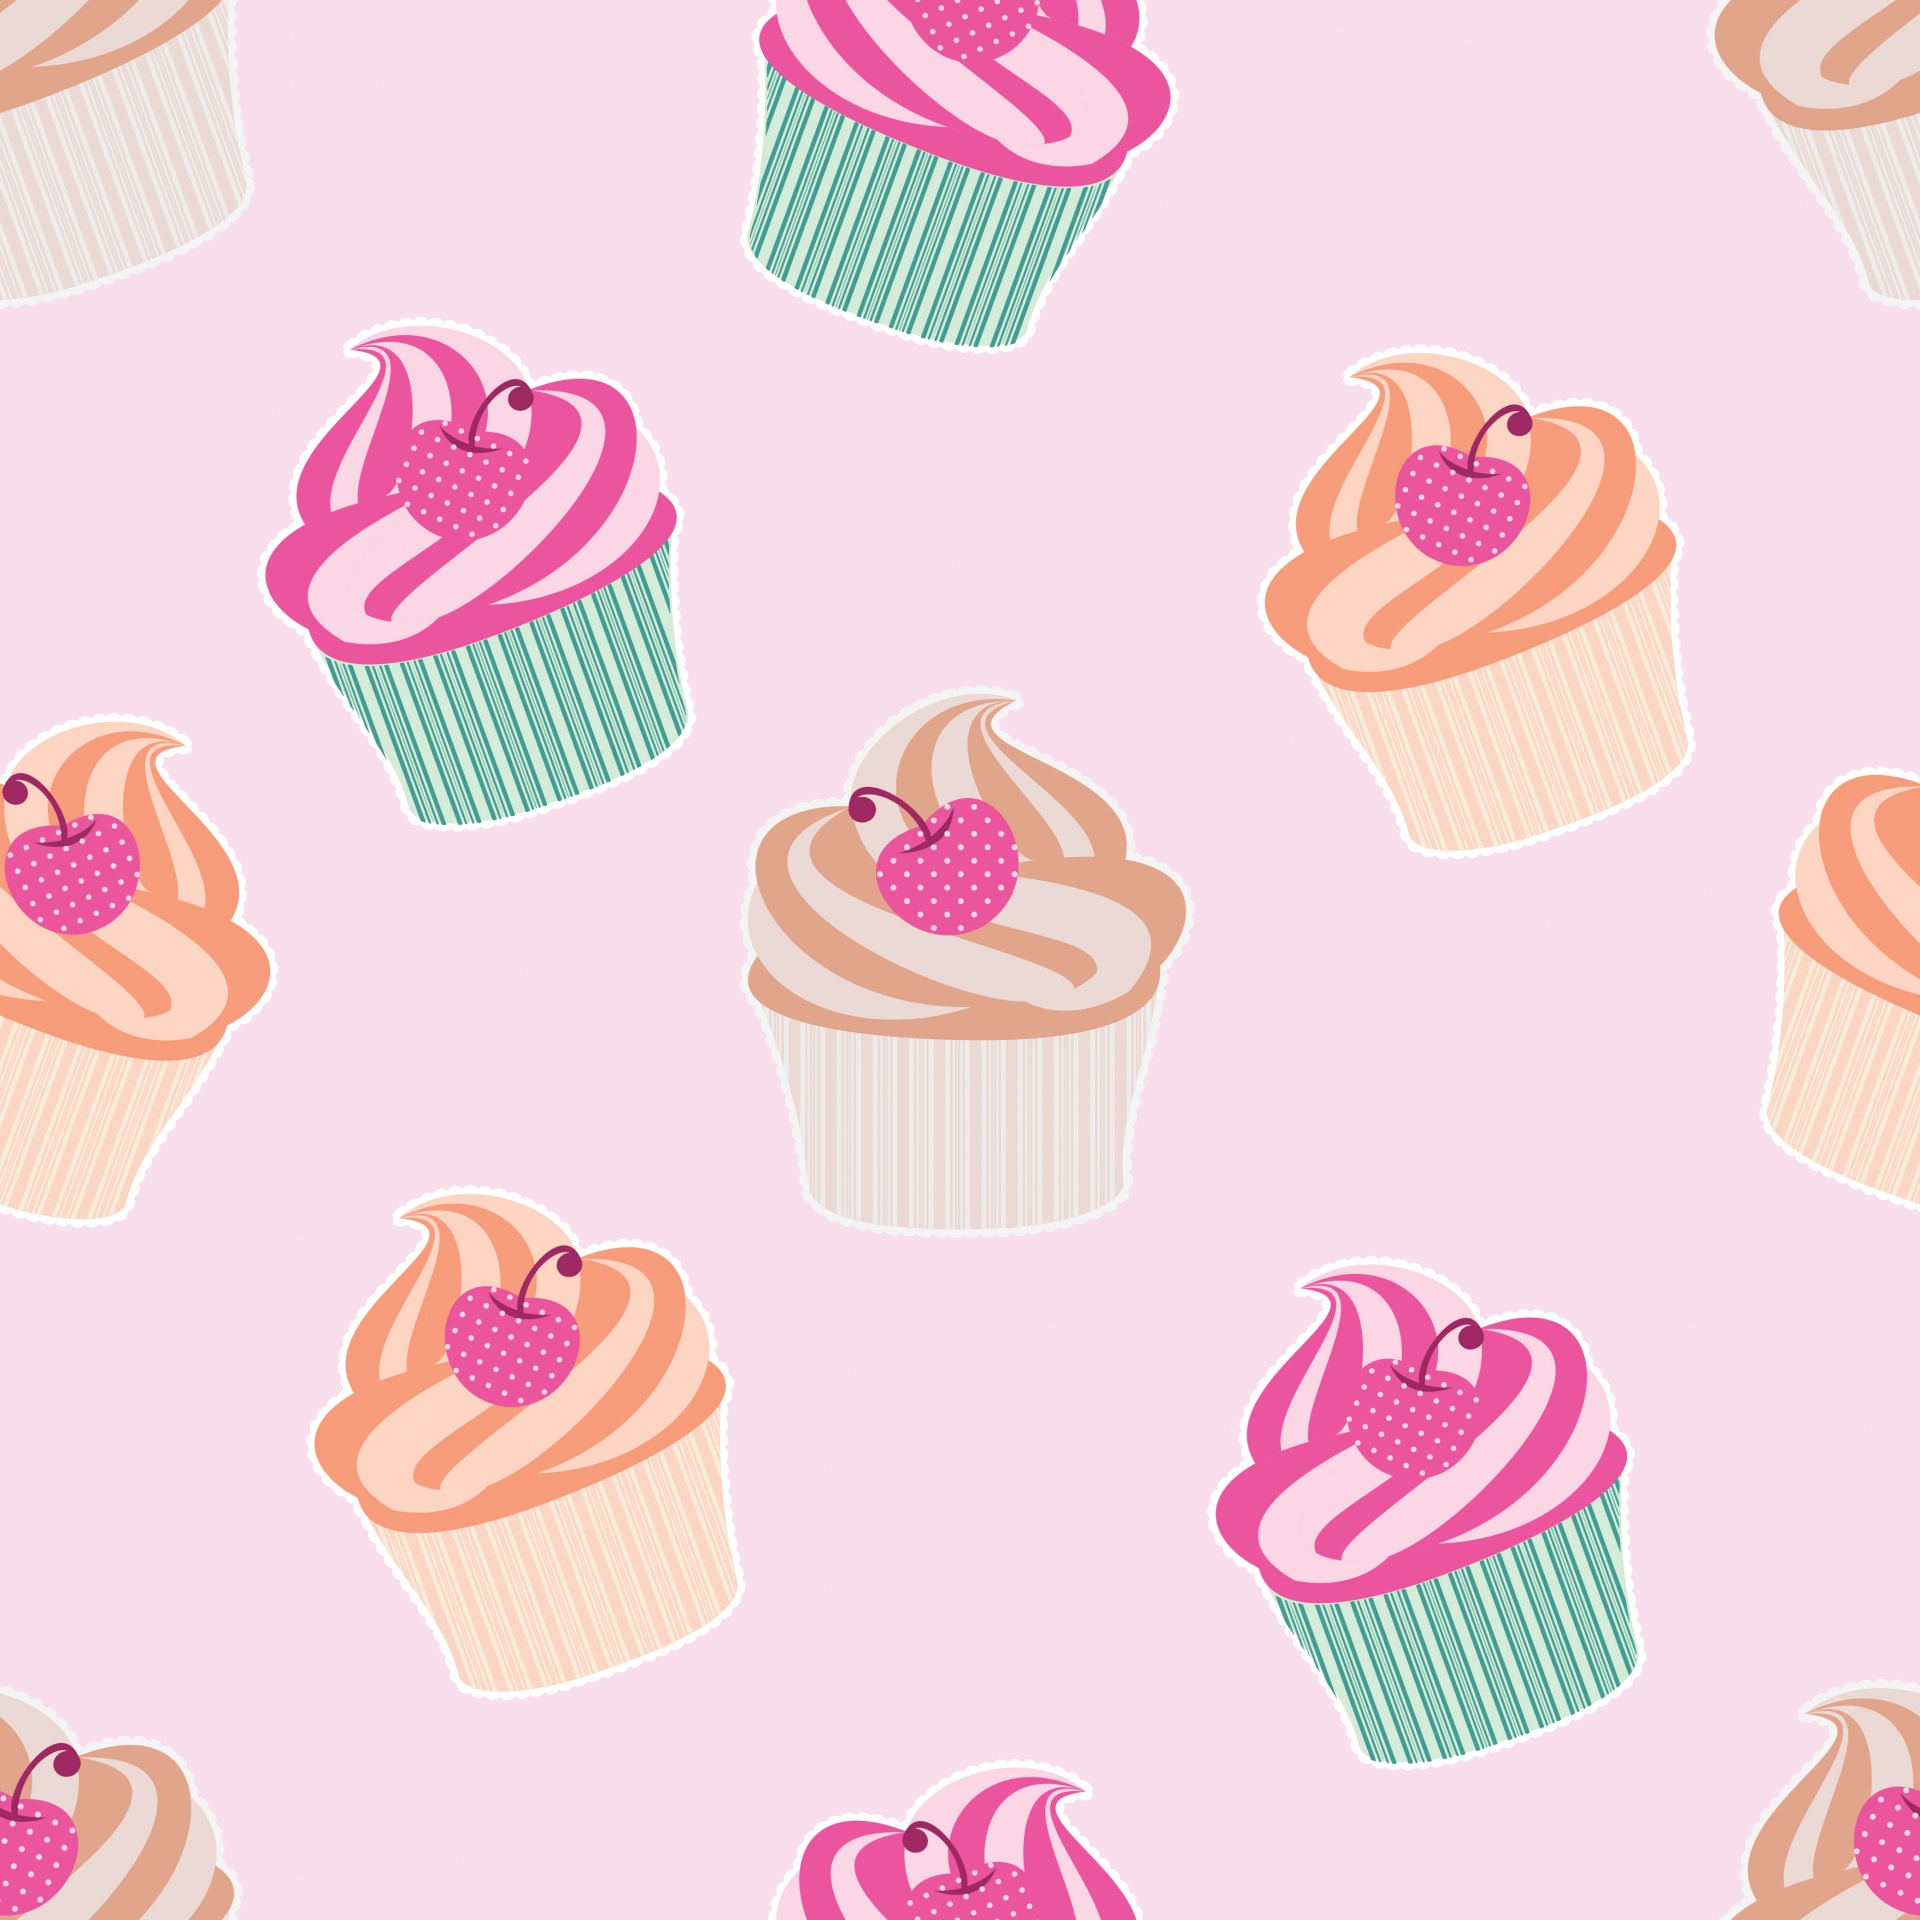 Colorful cupcakes wallpaper background